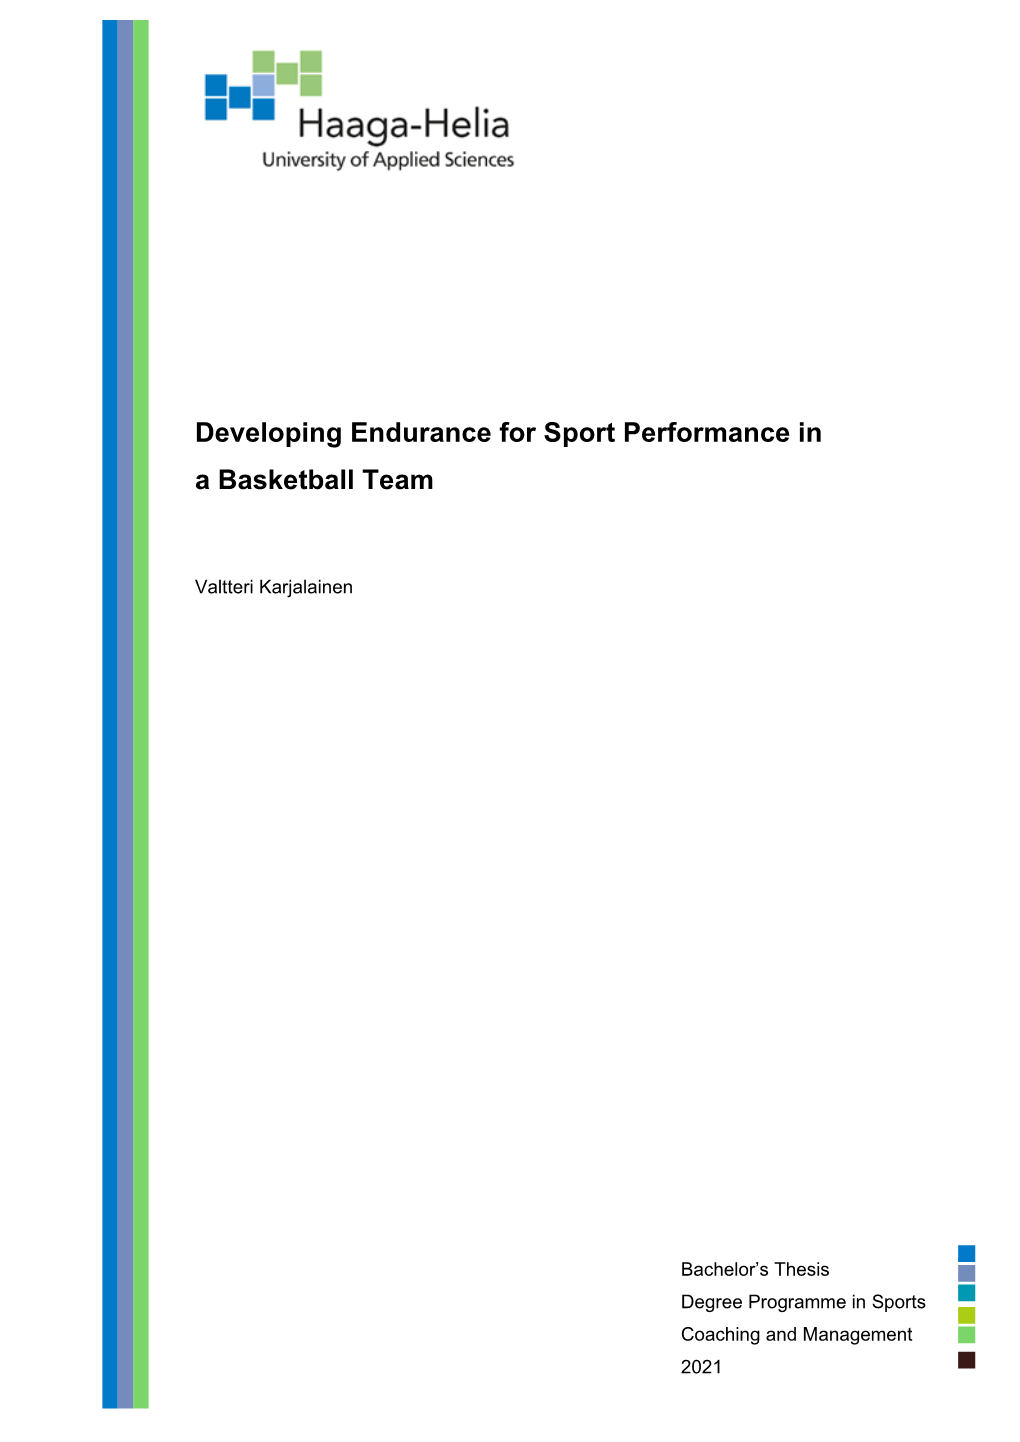 Developing Endurance for Sport Performance in a Basketball Team